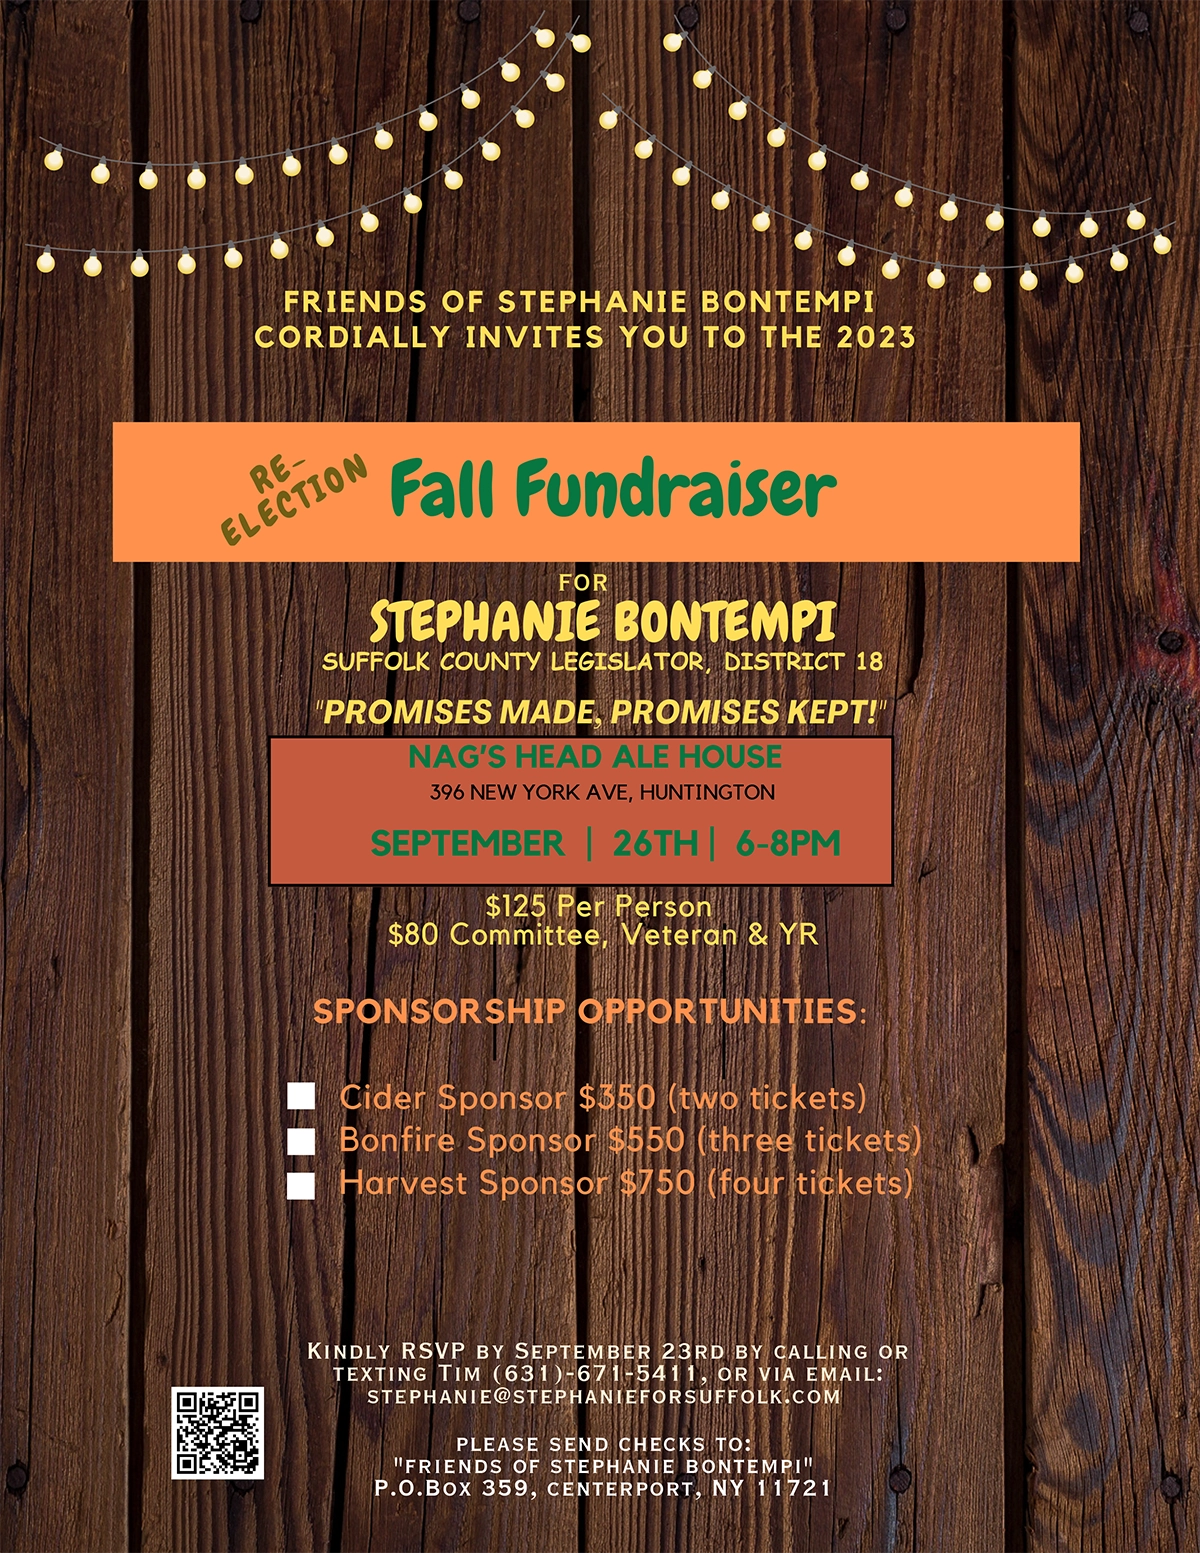 re-election fall fundraiser